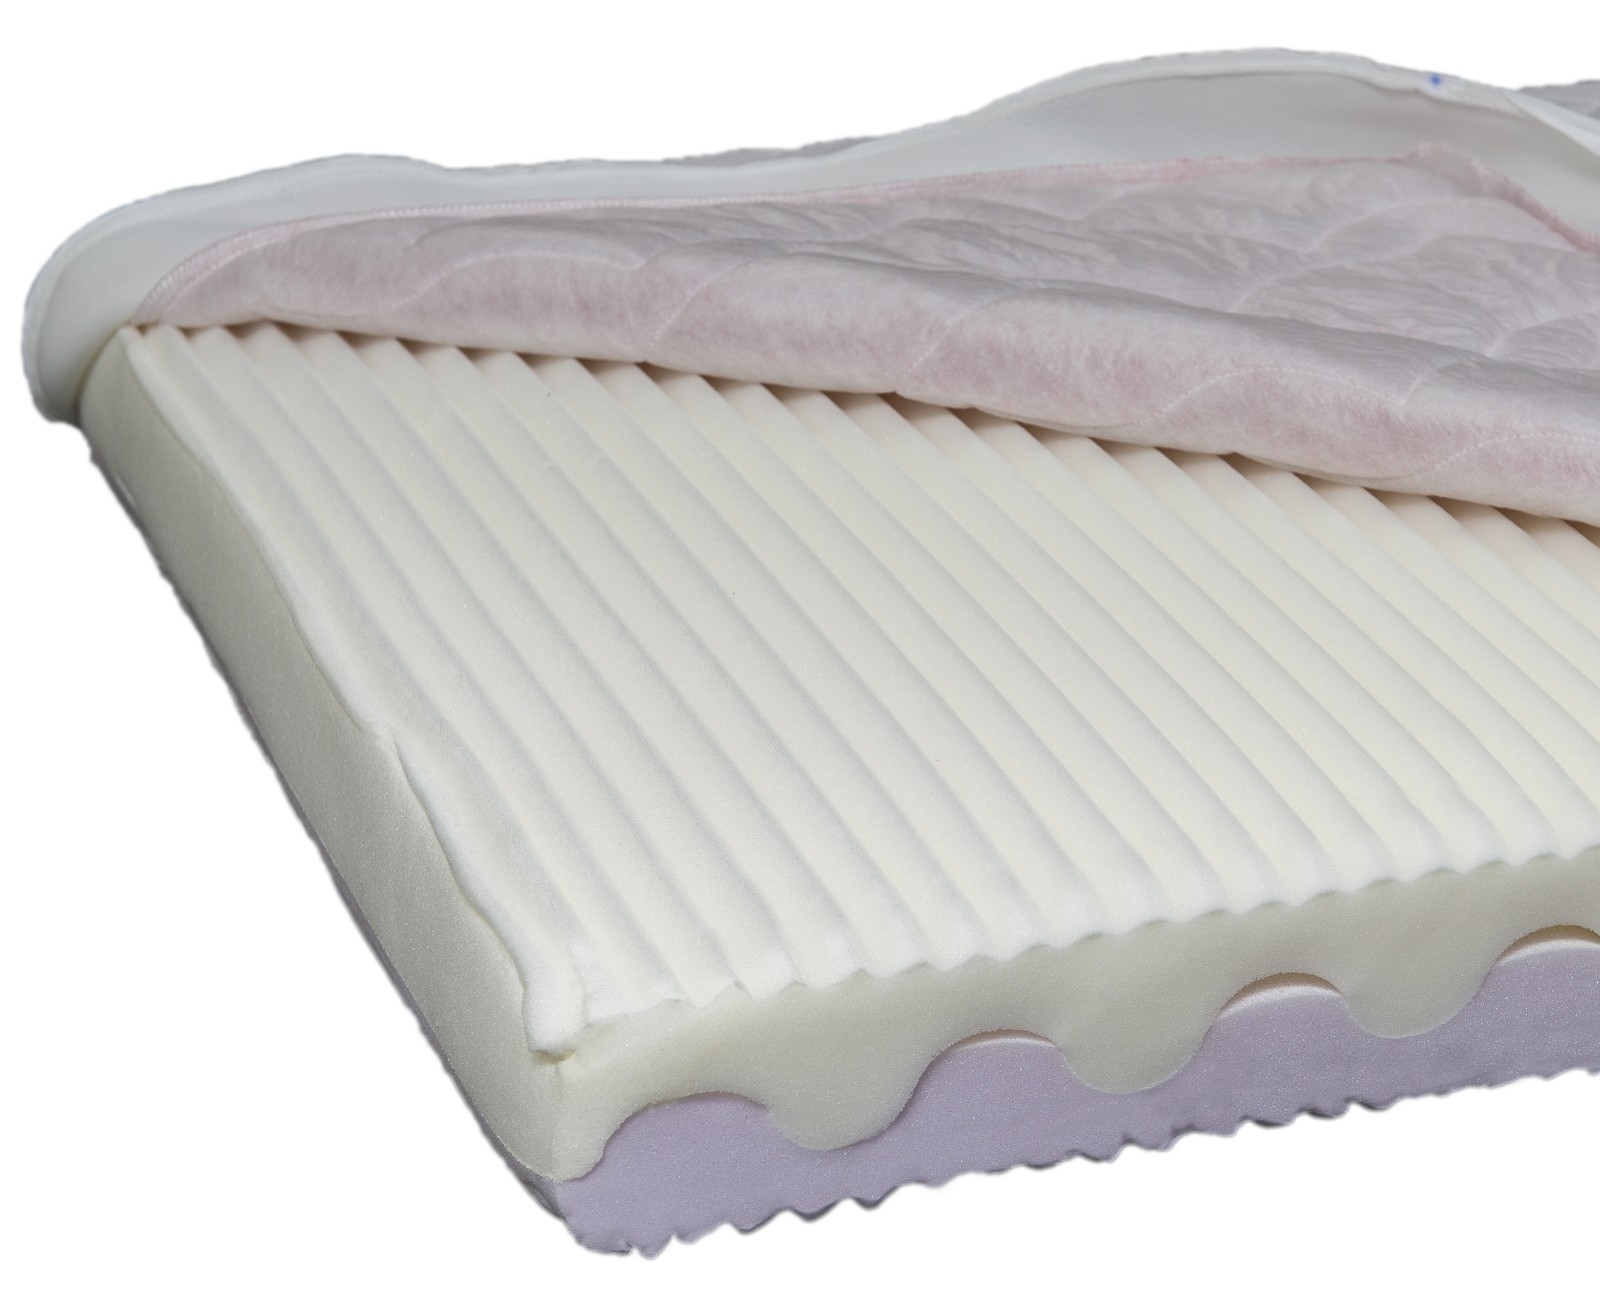 child air mattress launched